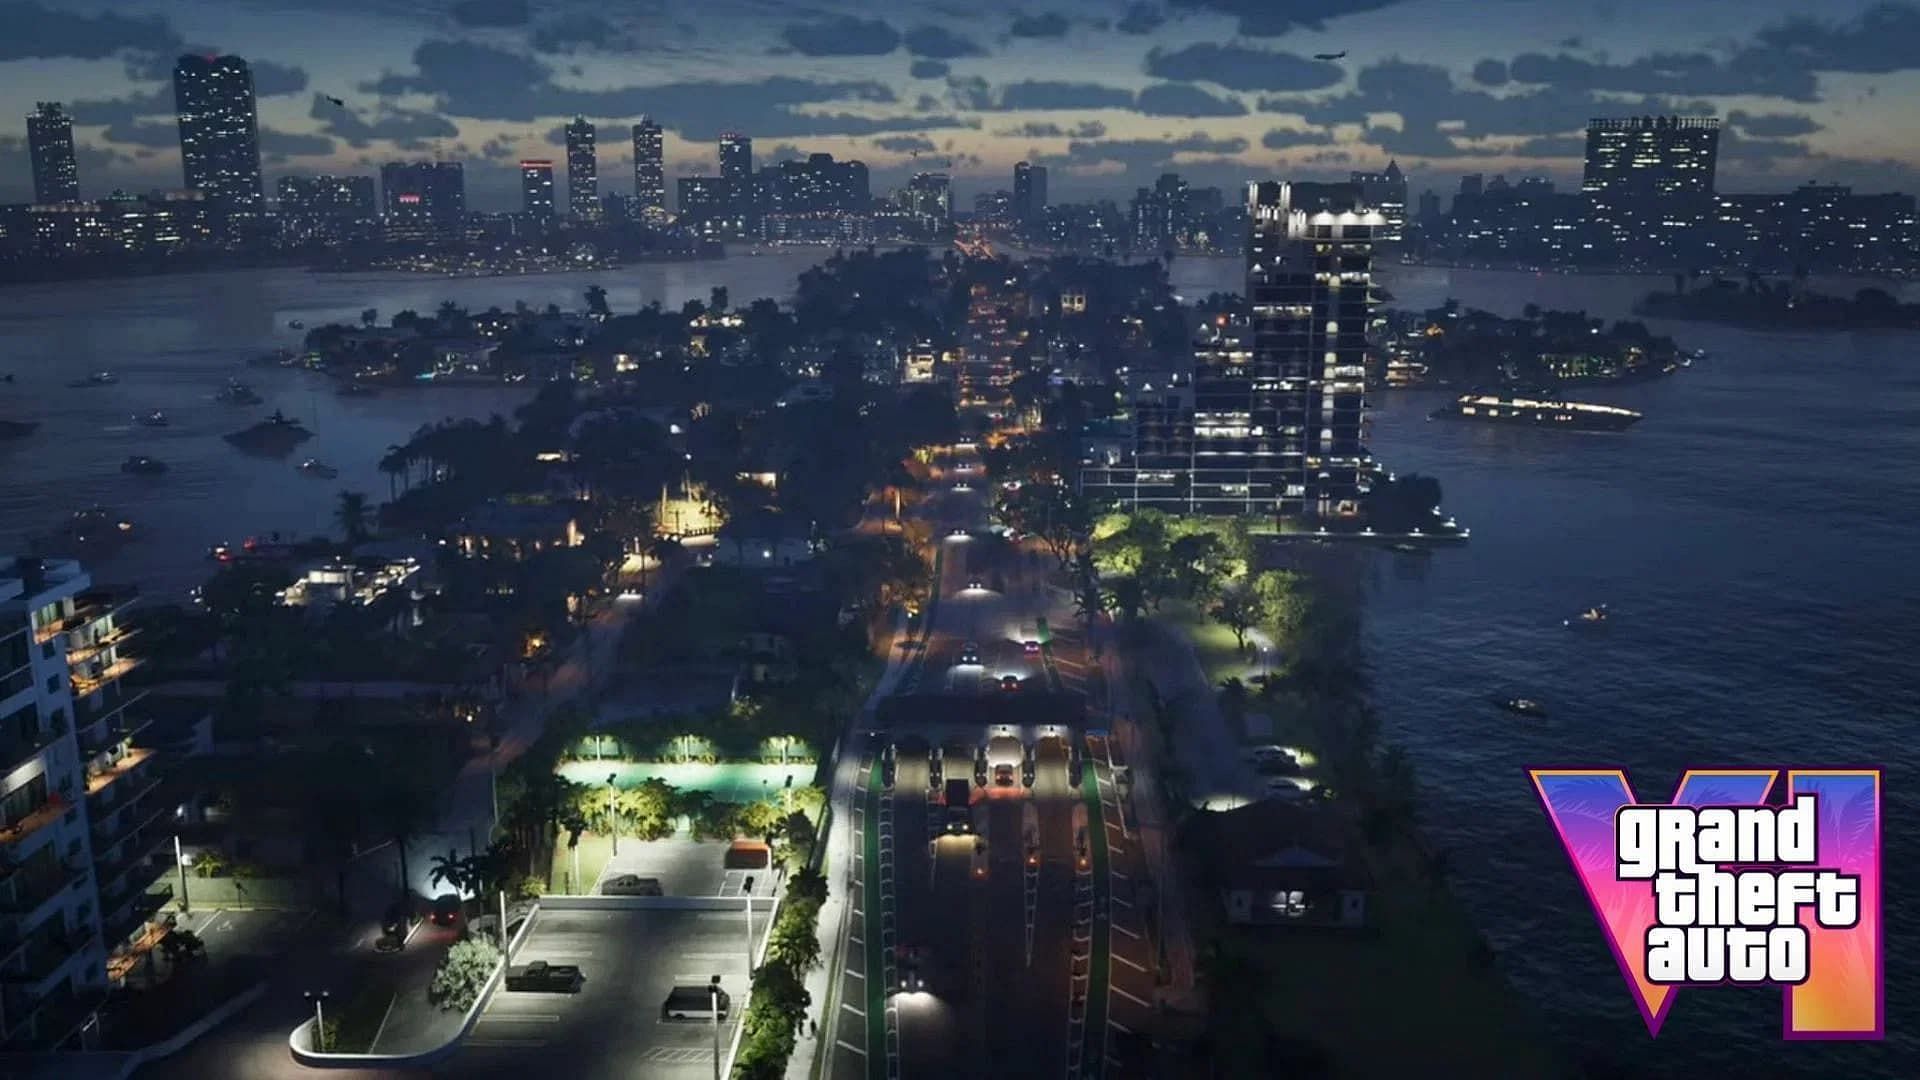 GTA 6 Map Leak Gives Glimpse of Vice City & More